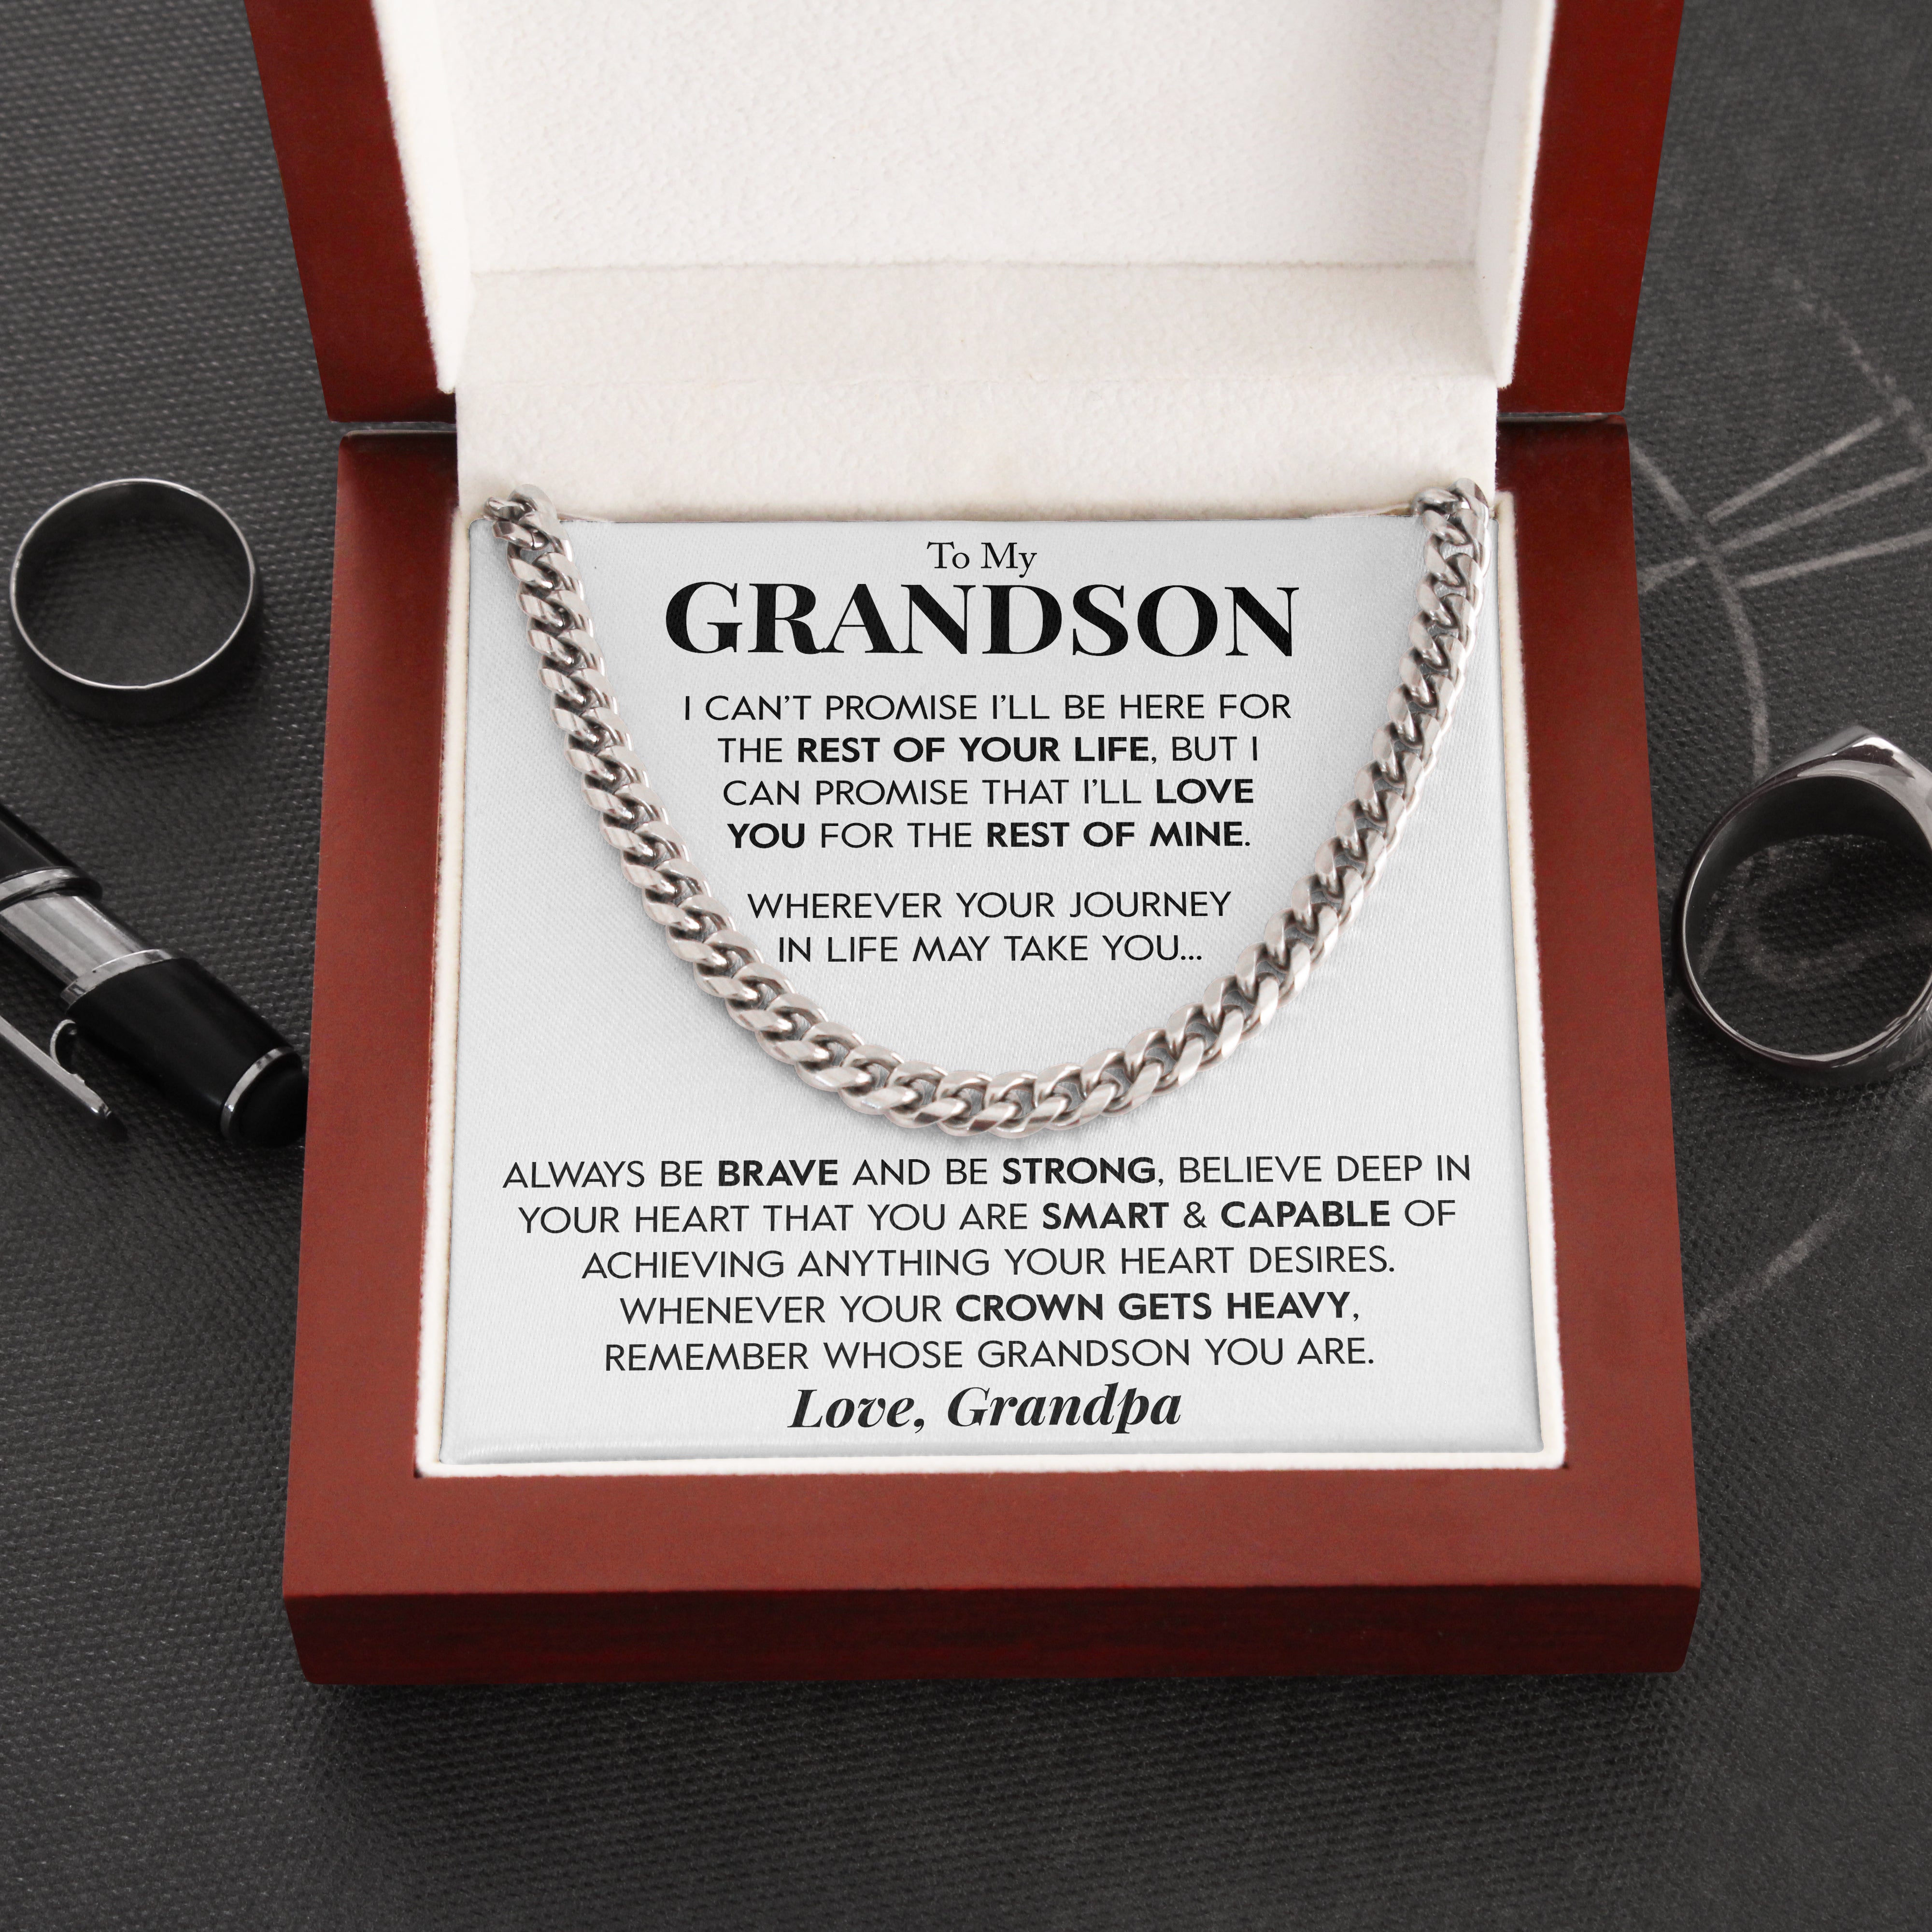 20% OFF - To My Grandson | "Rest of My Life" | Cuban Neck Chain